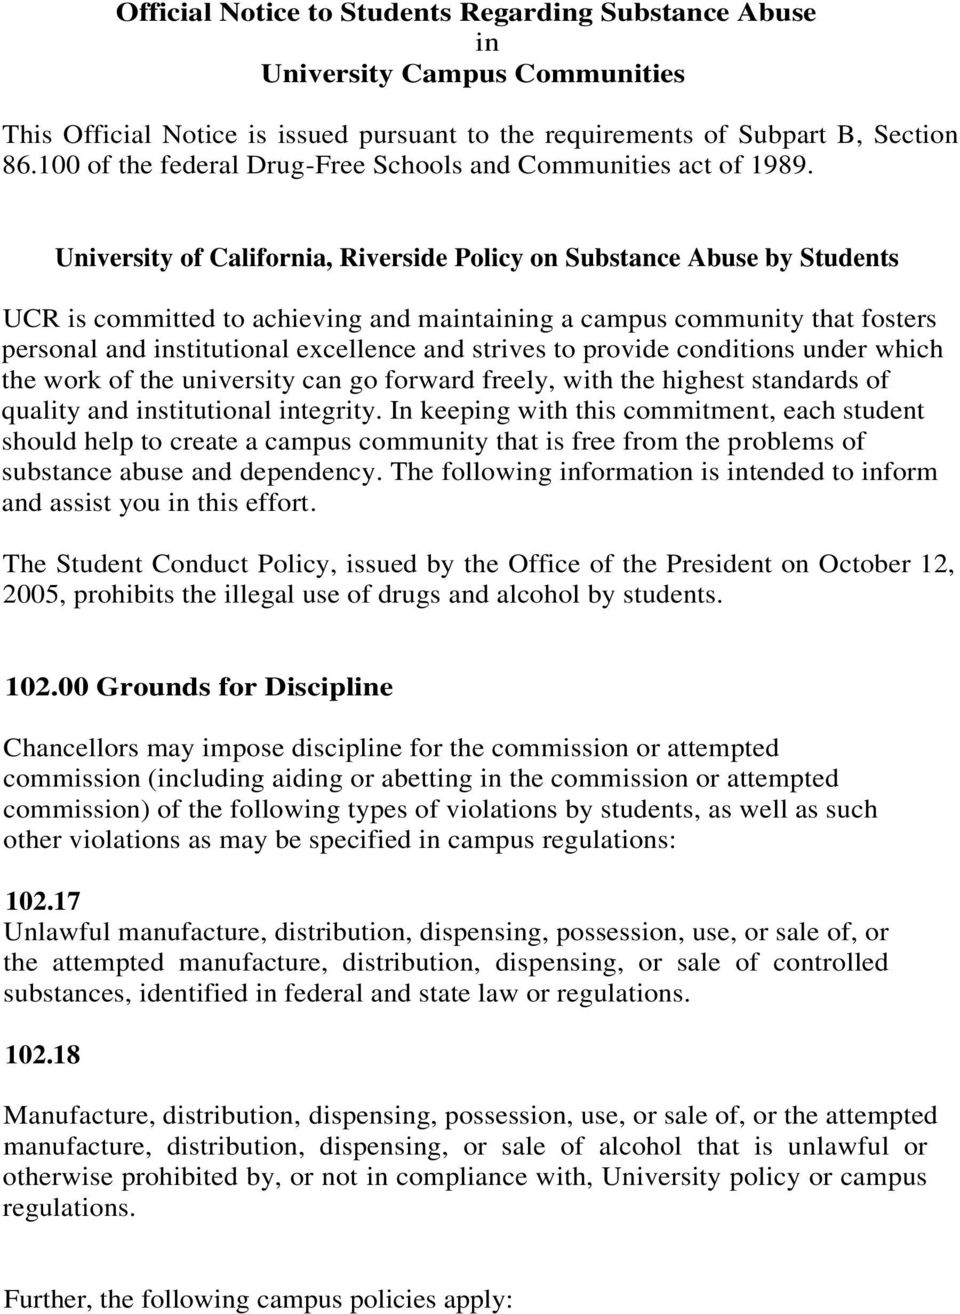 University of California, Riverside Policy on Substance Abuse by Students UCR is committed to achieving and maintaining a campus community that fosters personal and institutional excellence and